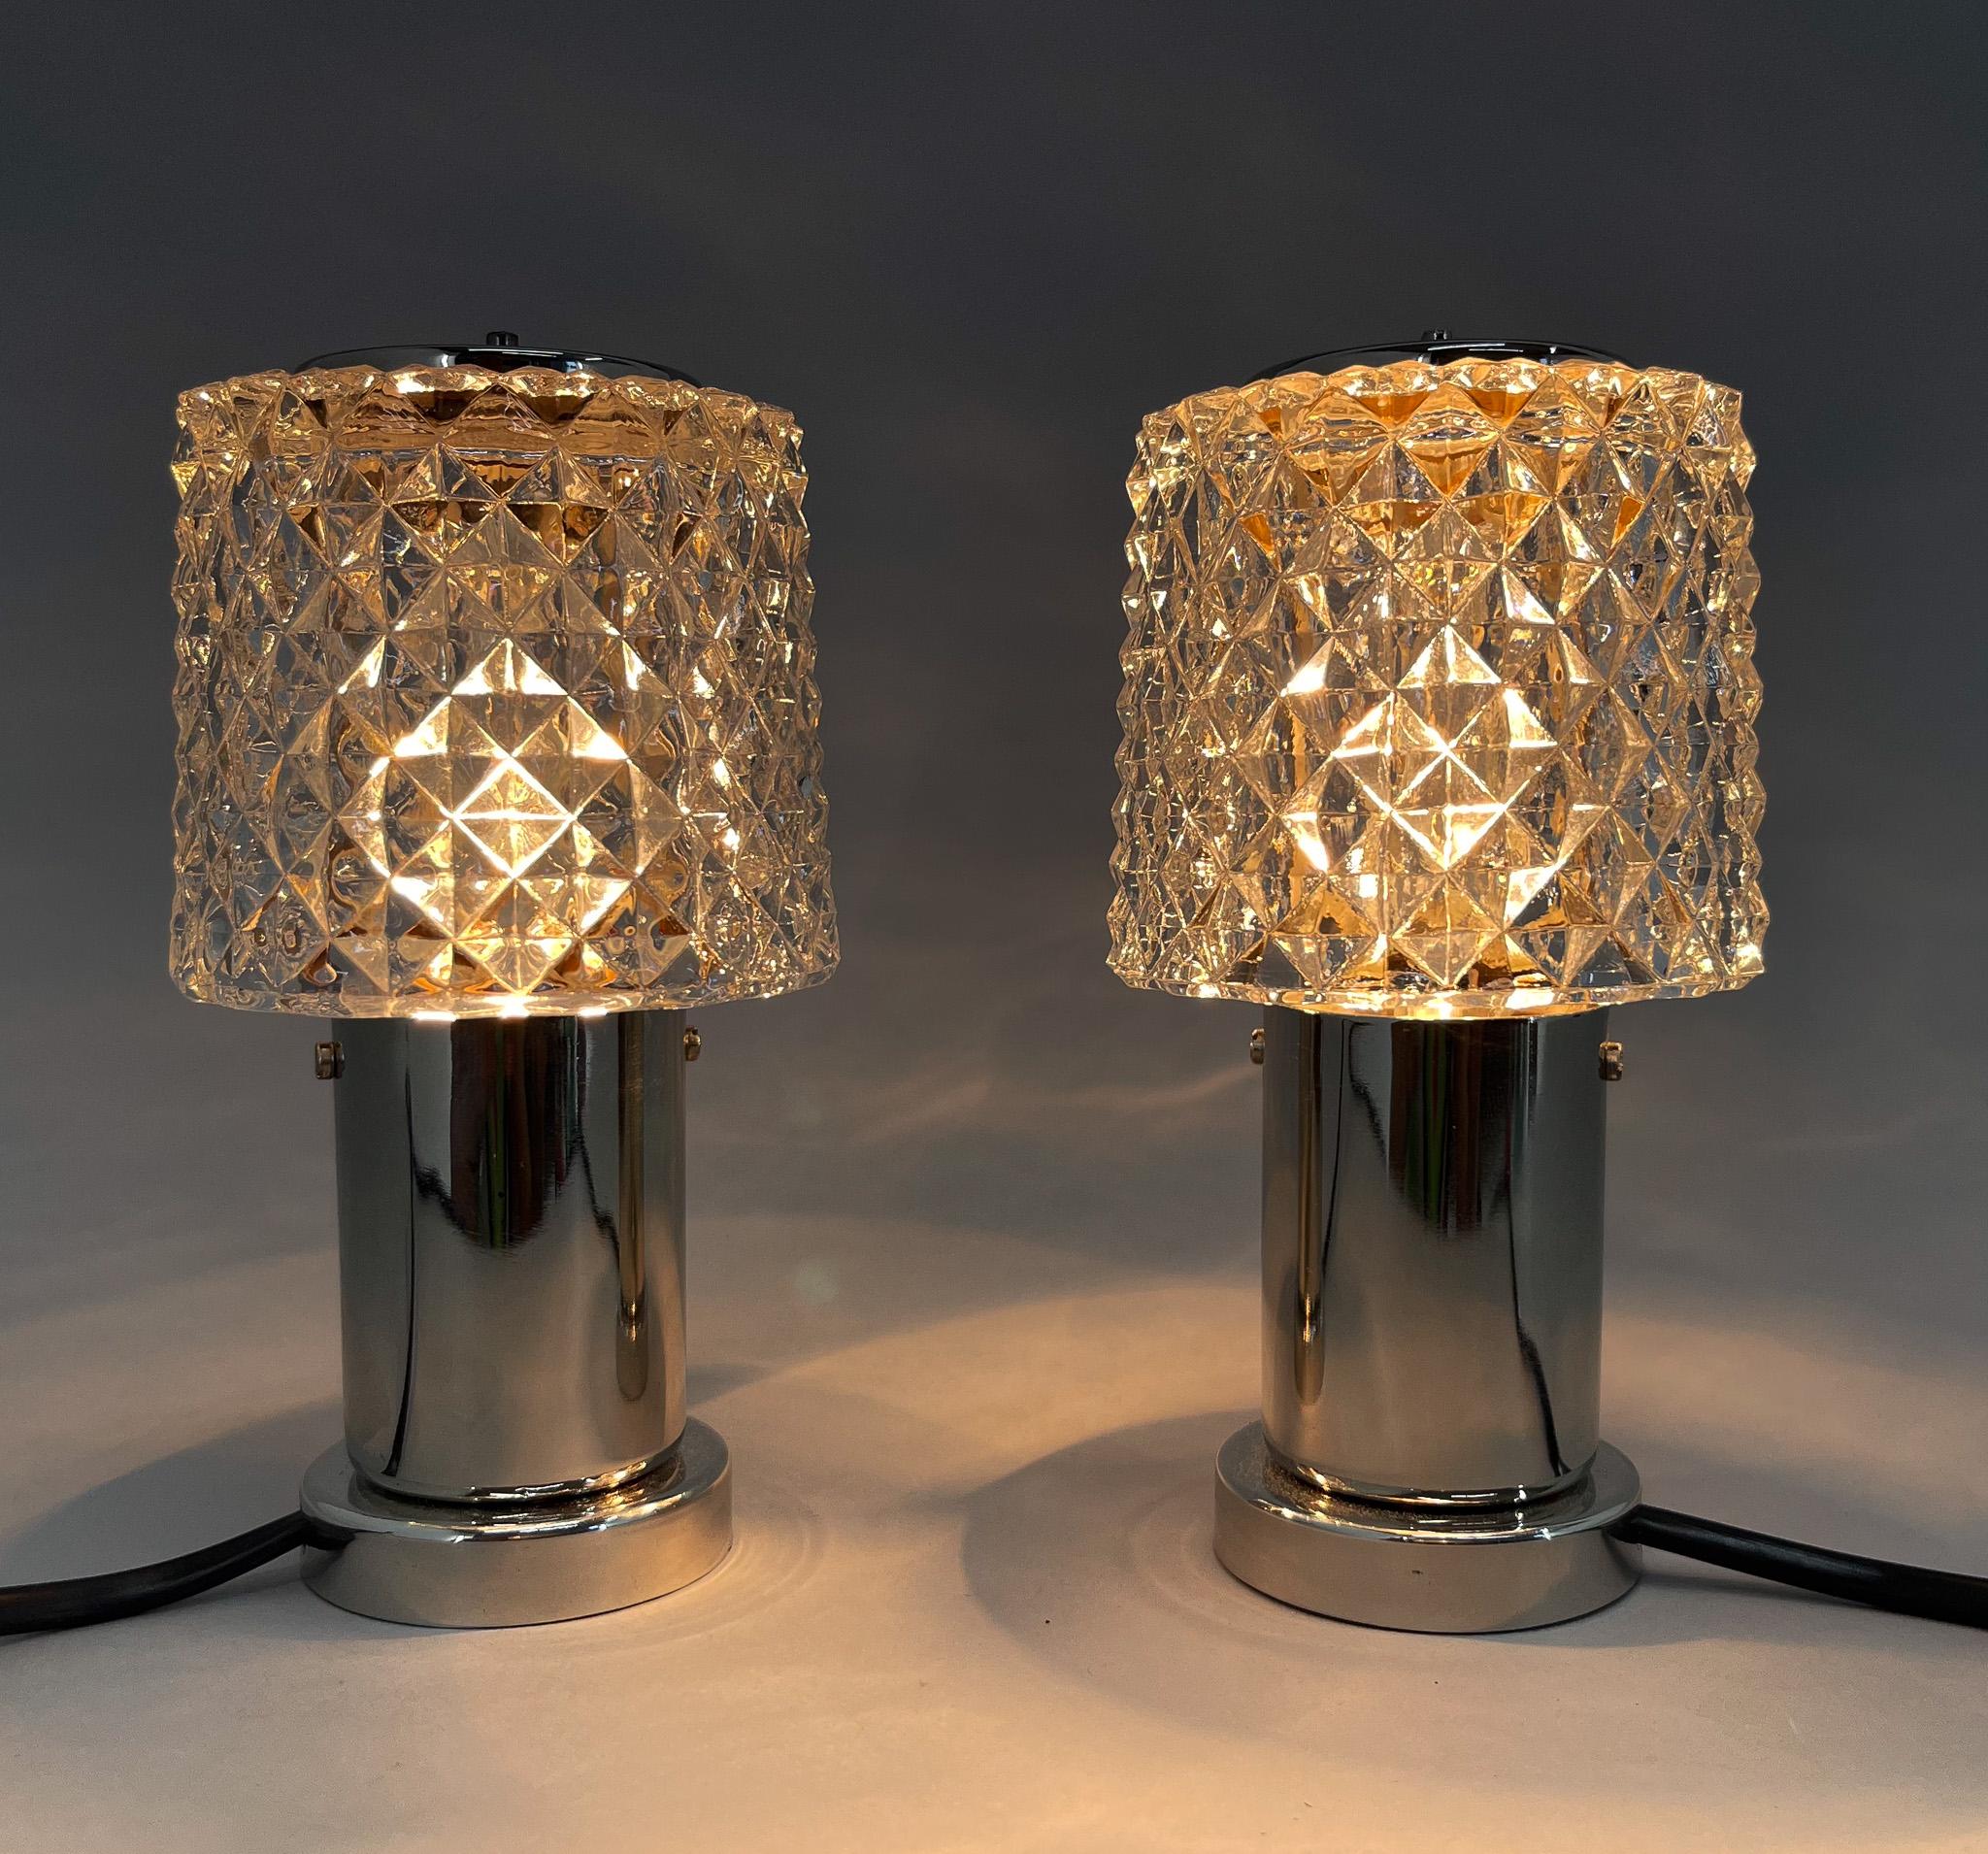 Czech Pair of Mid-Century Chrome Table Lamps, 1960's / 4 Pairs Available For Sale